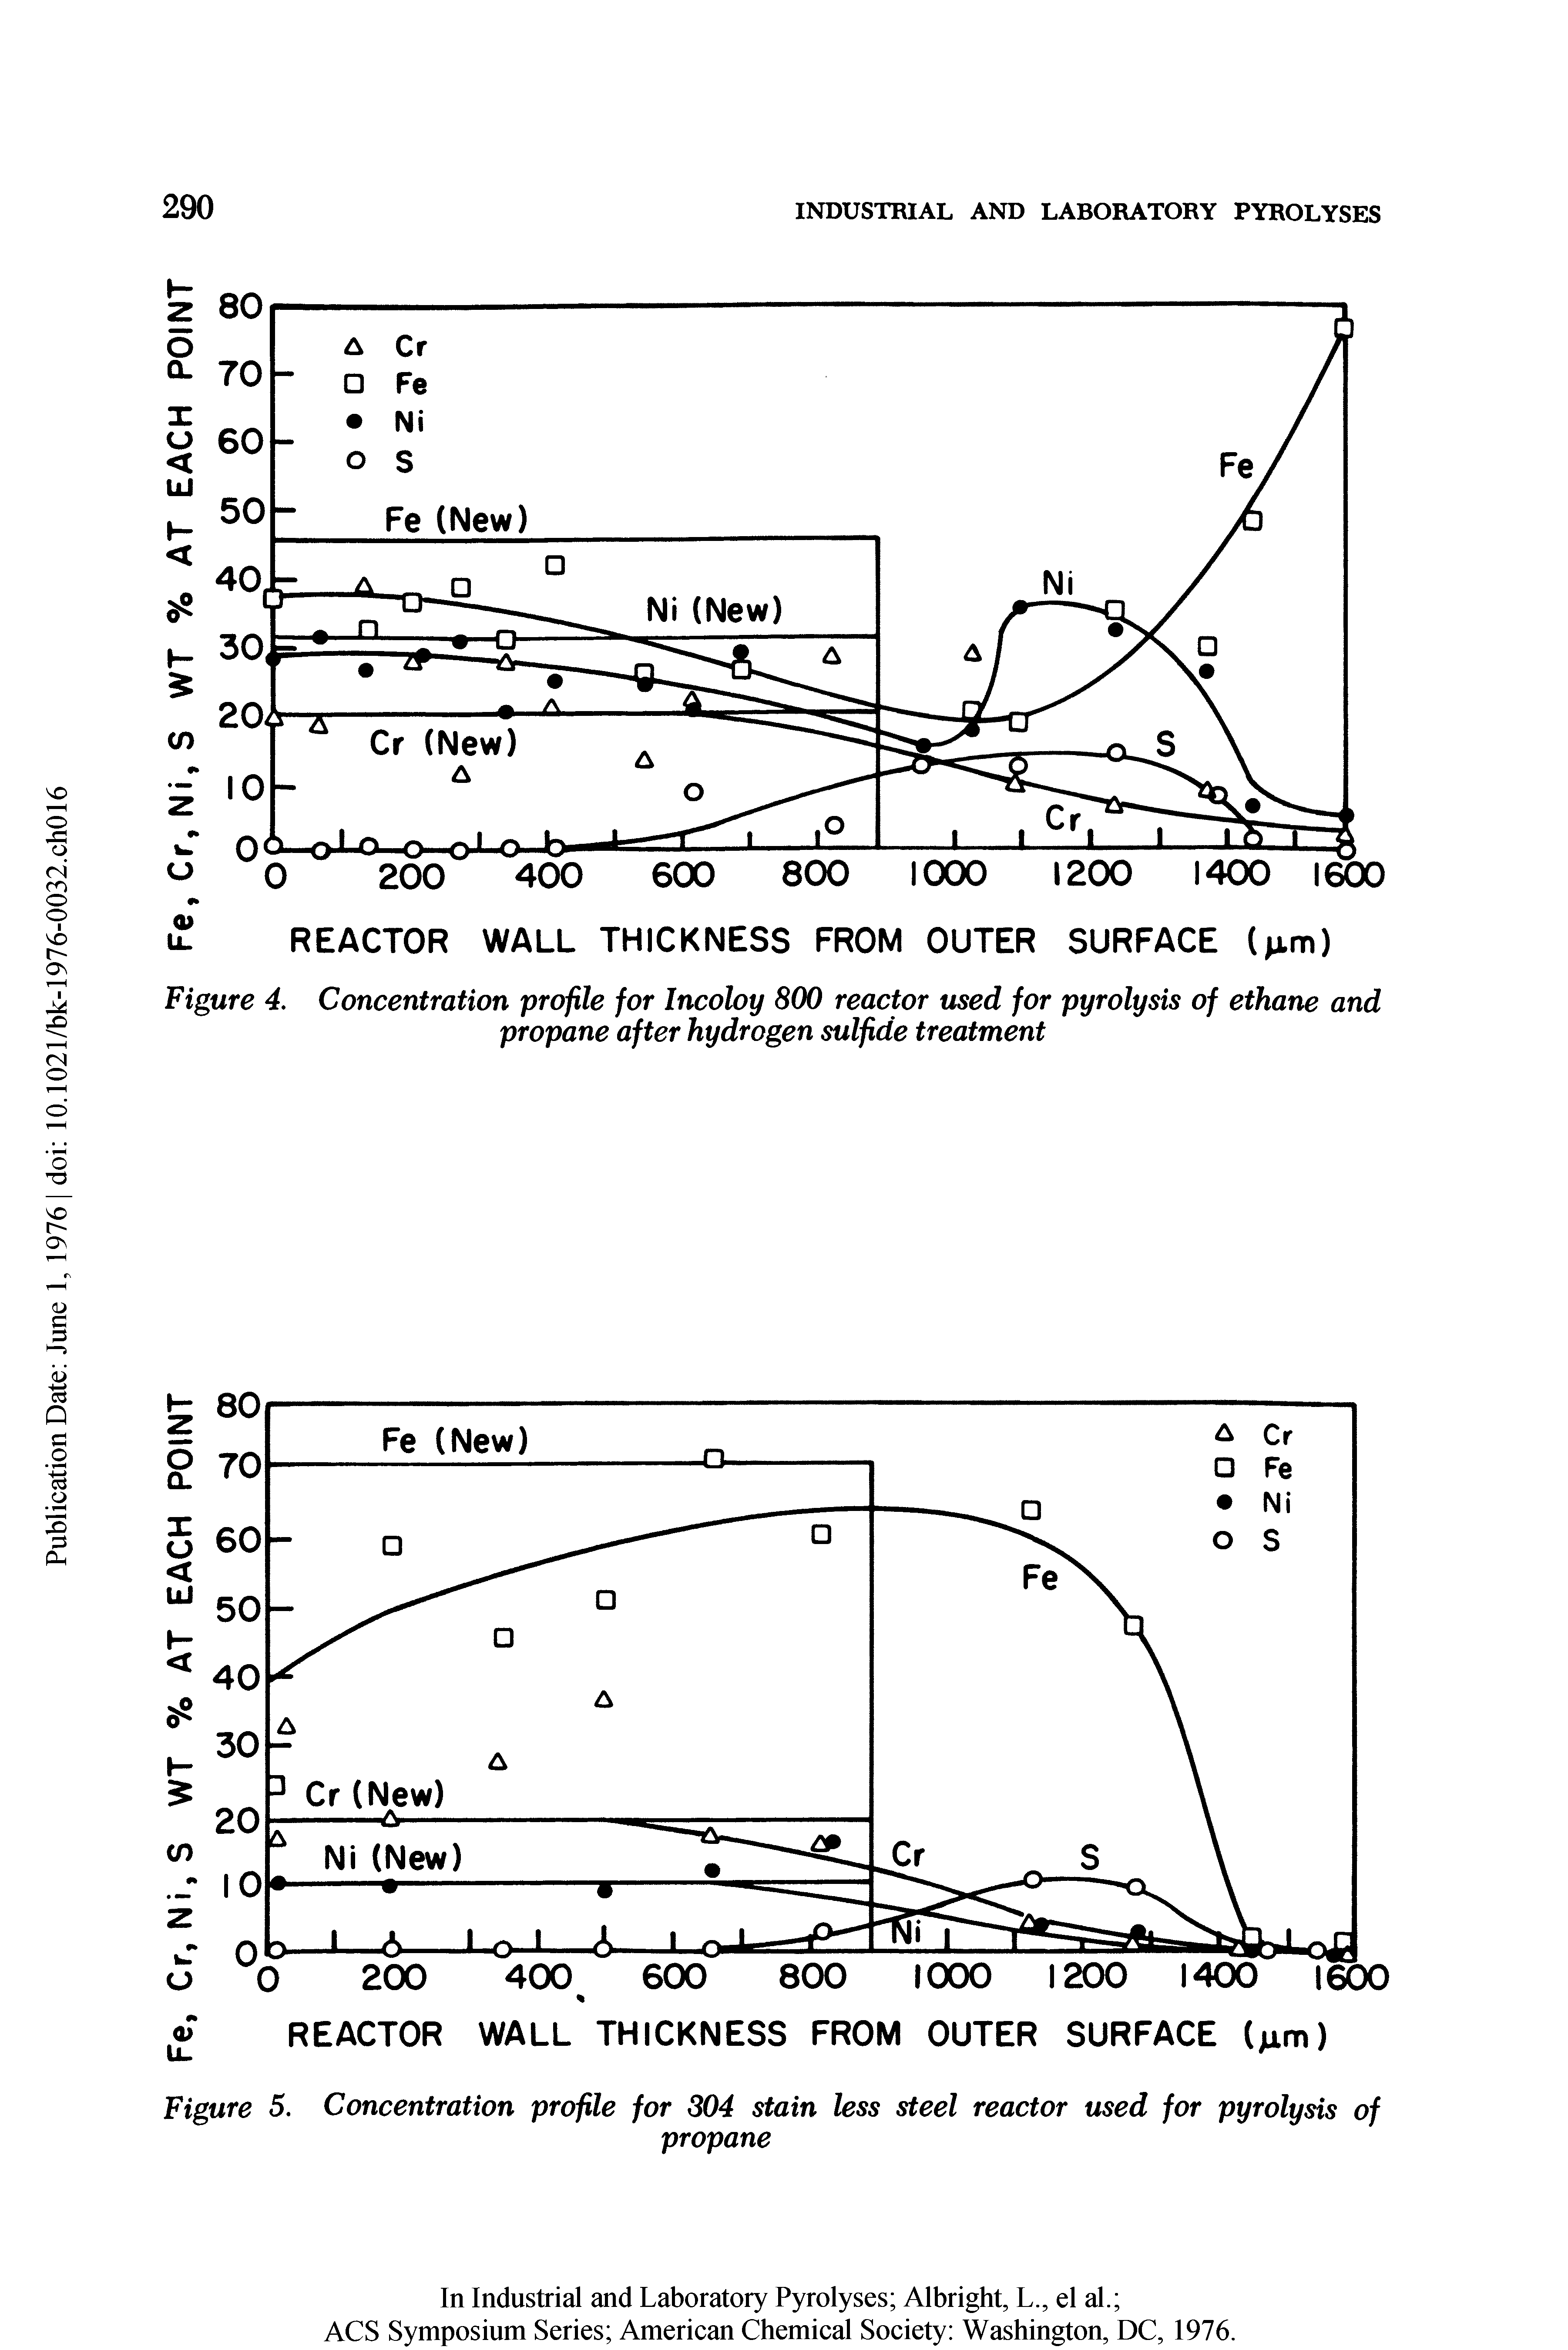 Figure 4. Concentration profile for Incoloy 800 reactor used for pyrolysis of ethane and propane after hydrogen sulfide treatment...